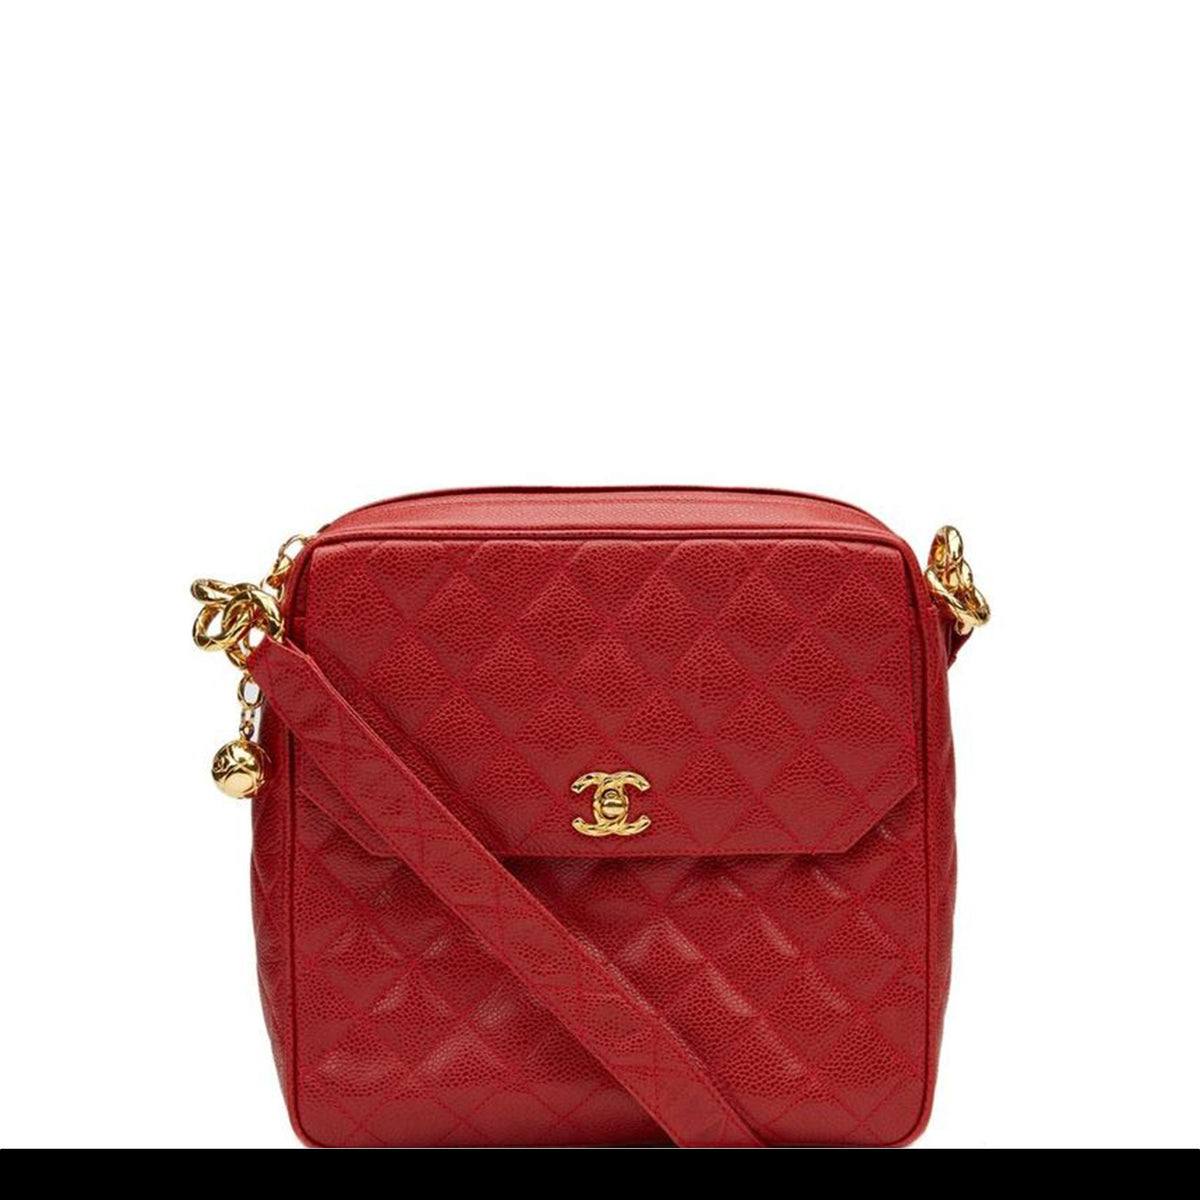 Chanel Classic Flap Vintage with Gold Hardware Red Caviar Leather